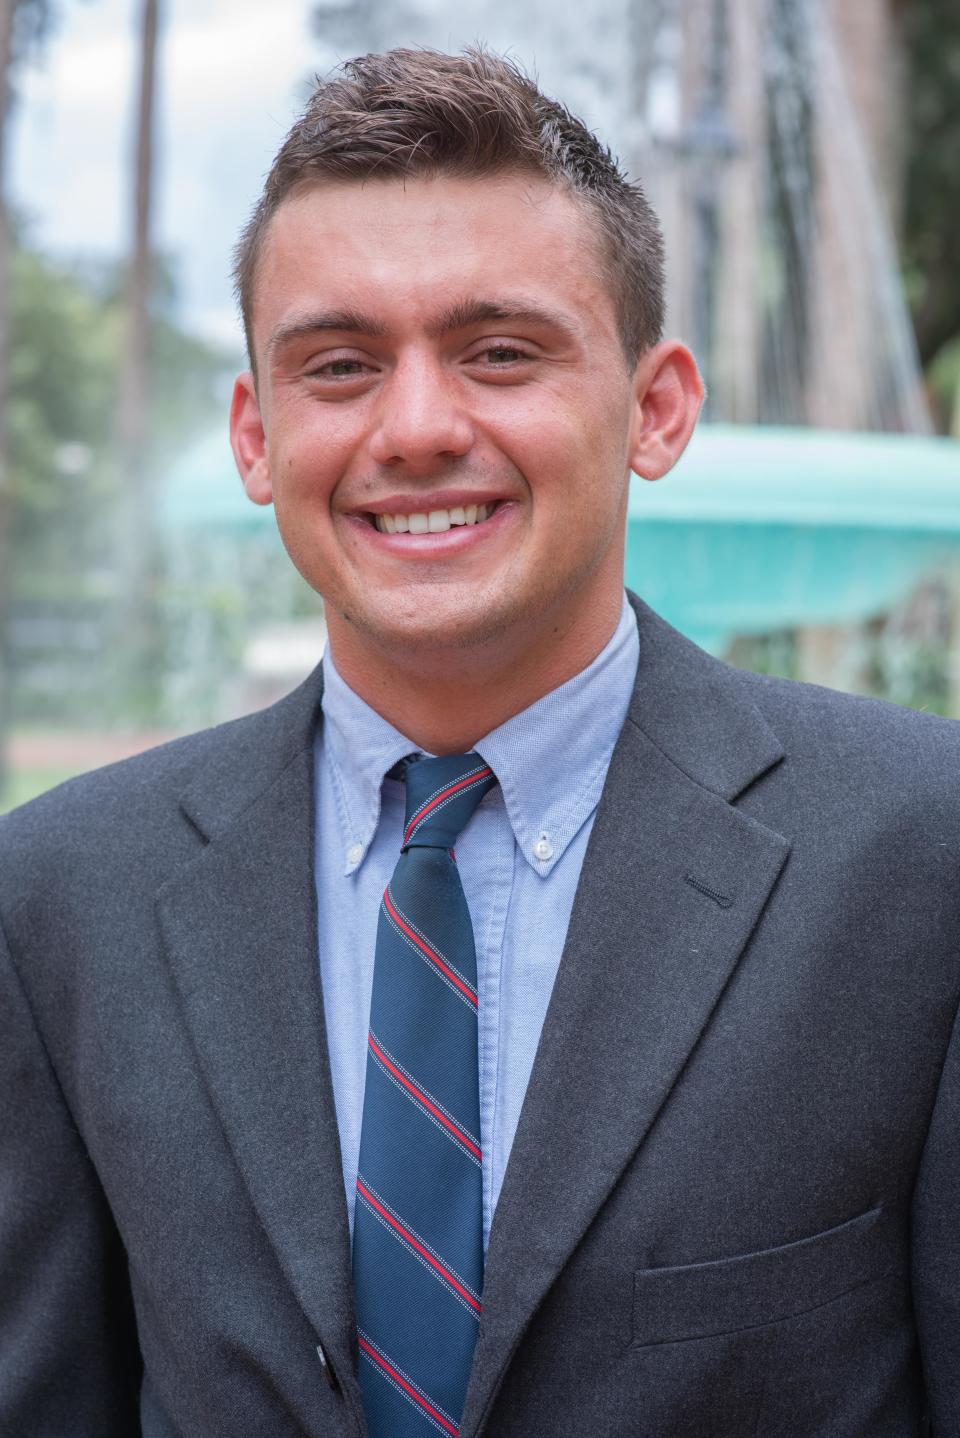 Camilo Arado Lilleslatten is on Stetson University's moot court team, which is headed to the American Moot Court Association National Tournament in Baton Rouge, Louisiana, on Jan. 14 and 15.